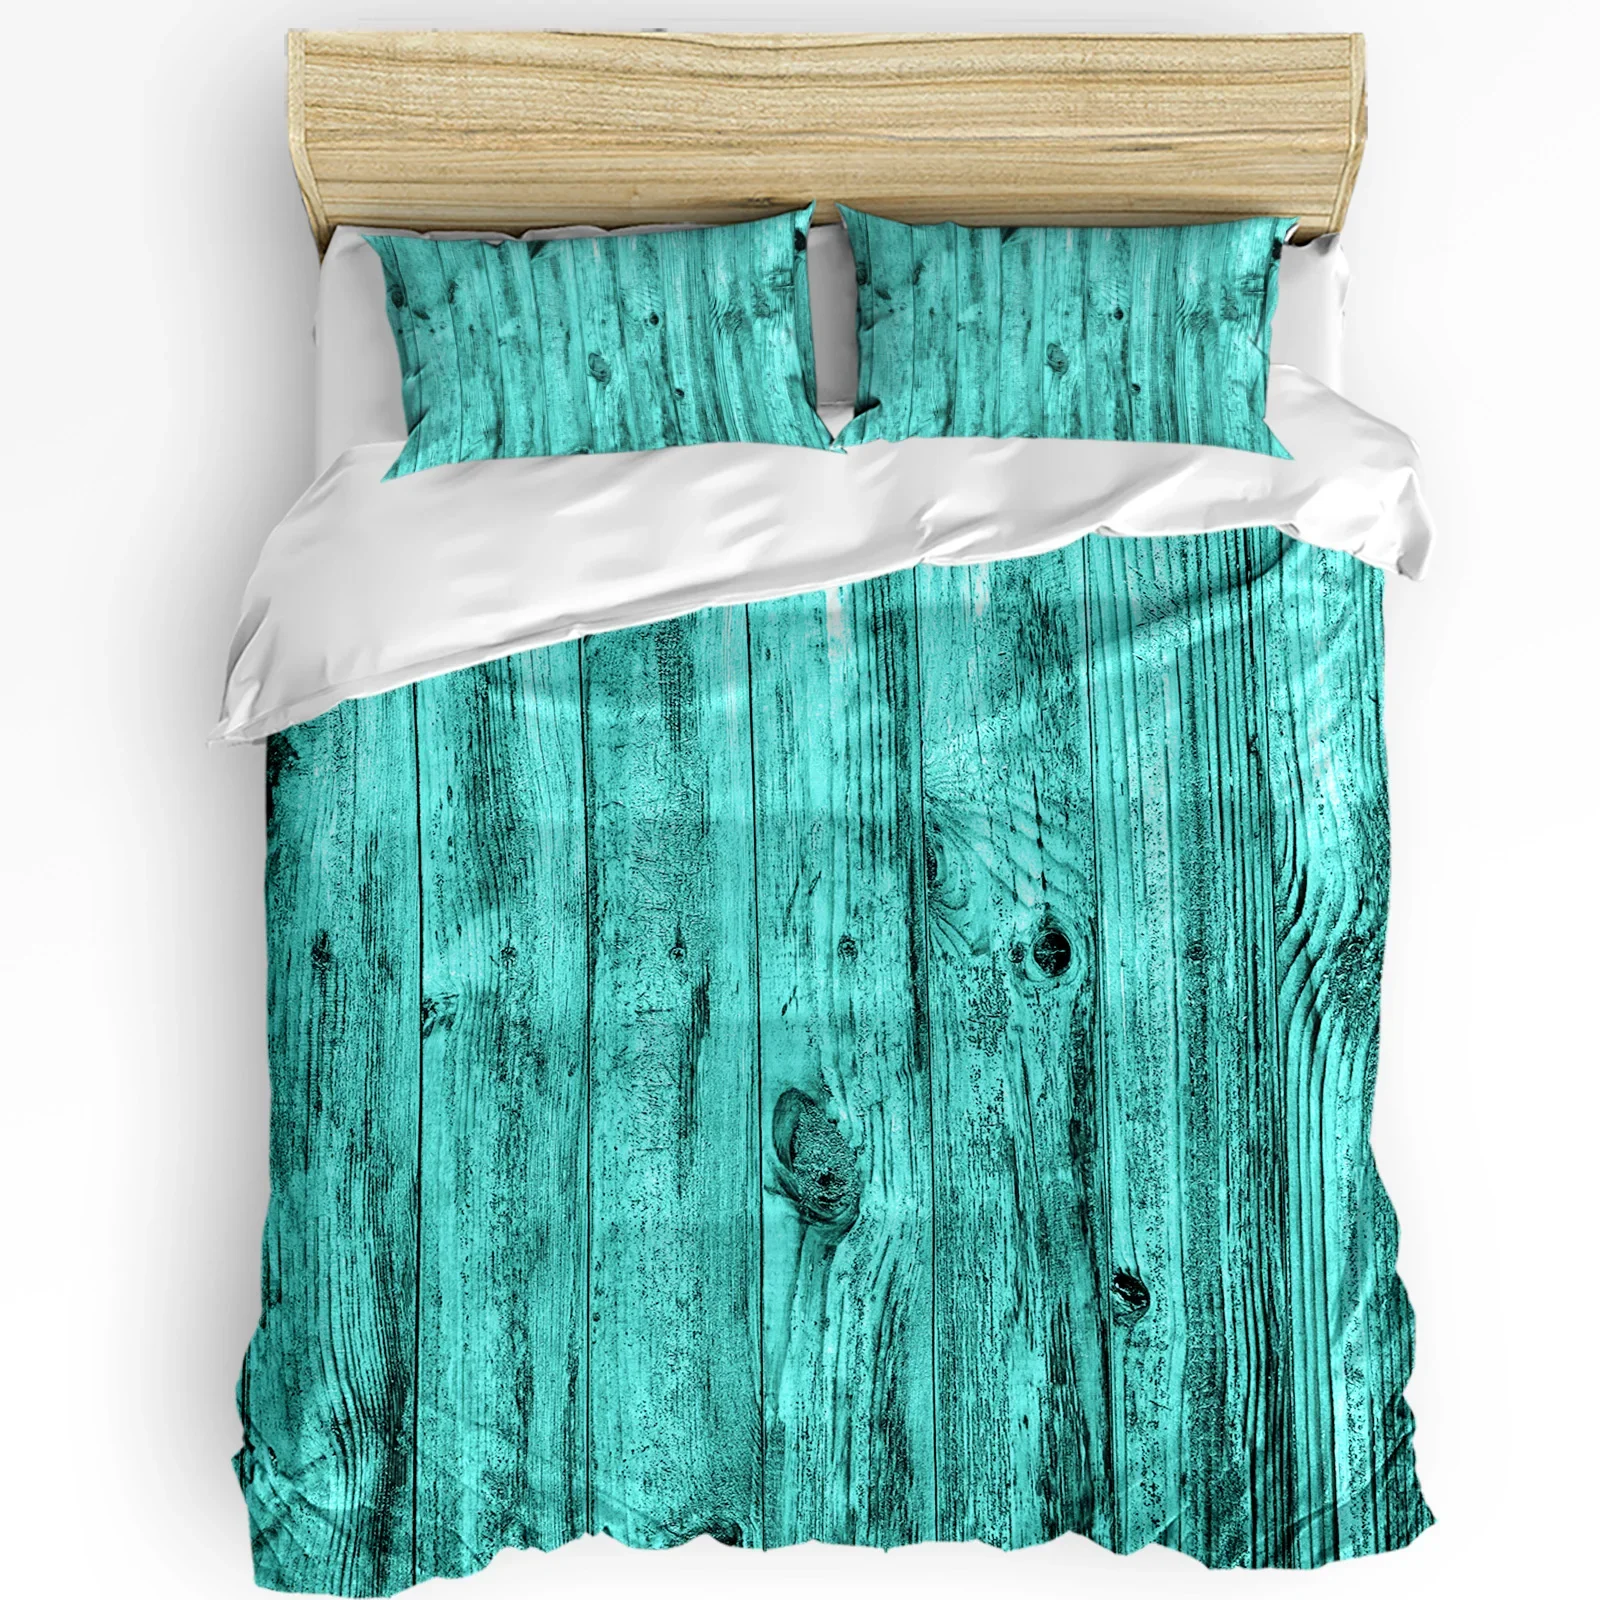 

Wood Grain Turquoise Duvet Cover Bed Bedding Set For Double Home Textile Quilt Cover Pillowcases Bedroom Bedding Set (No Sheet)